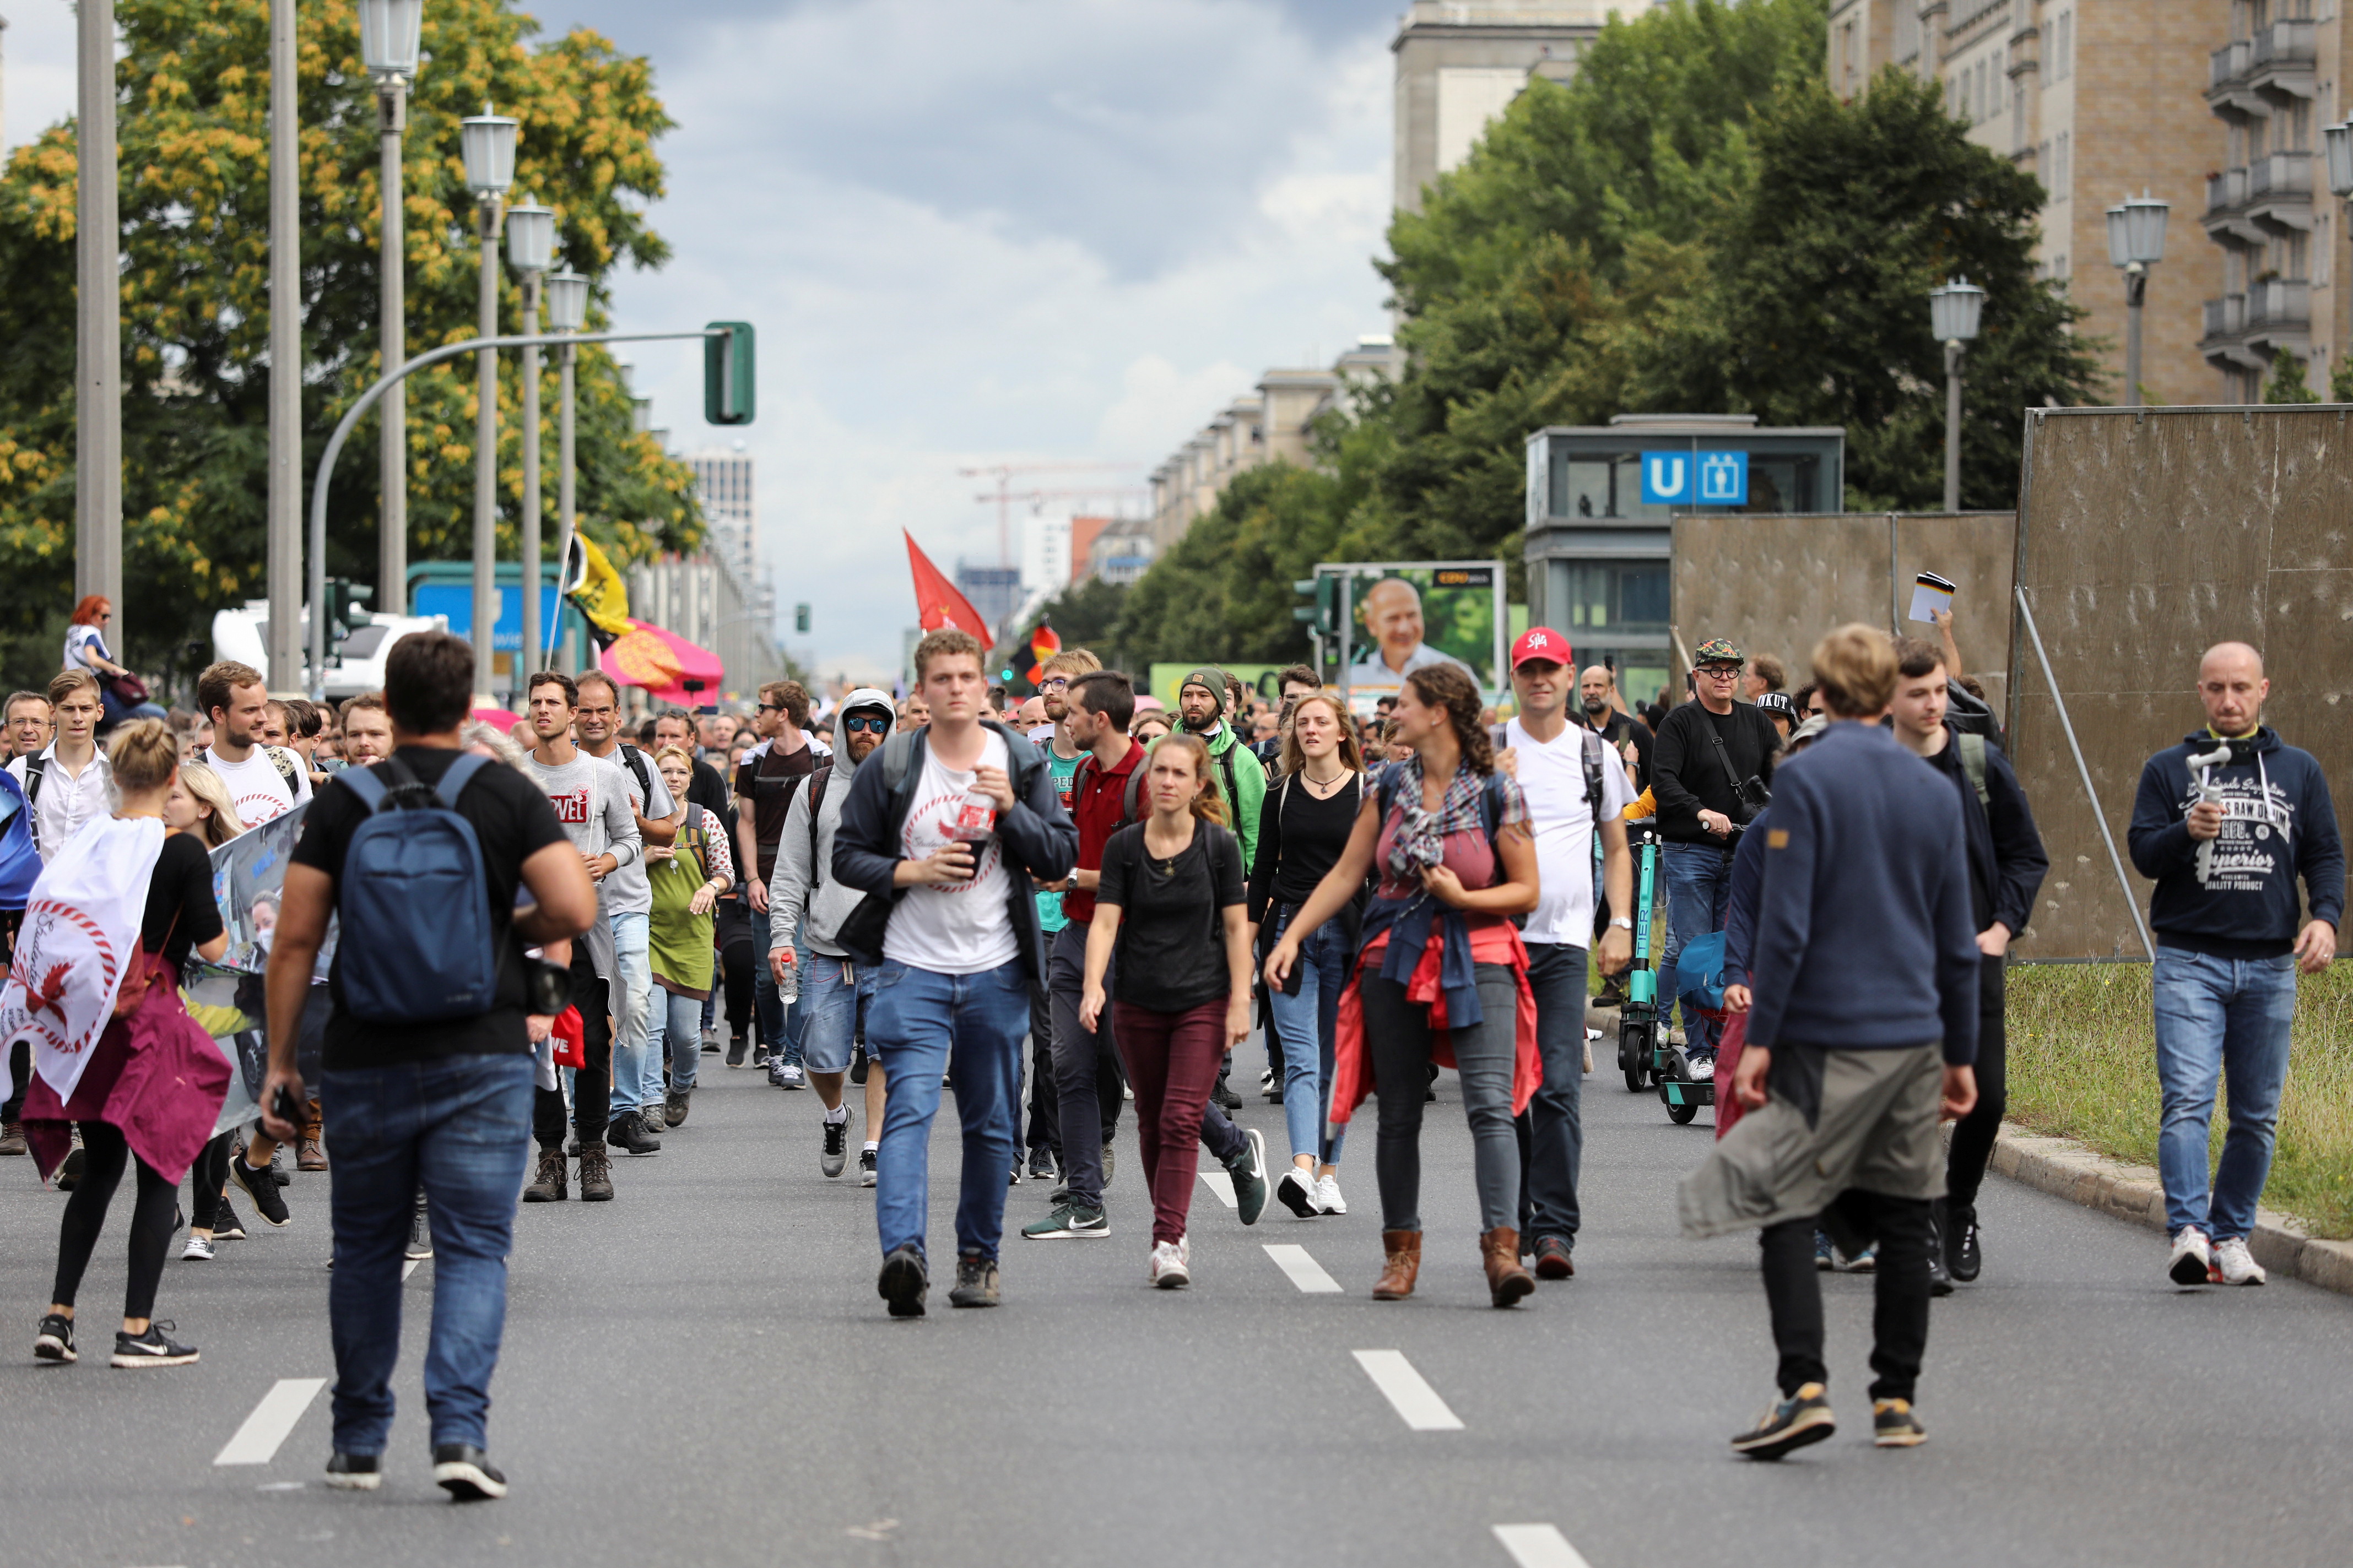 Thousands protest in Berlin against COVID curbs, vaccines   Reuters